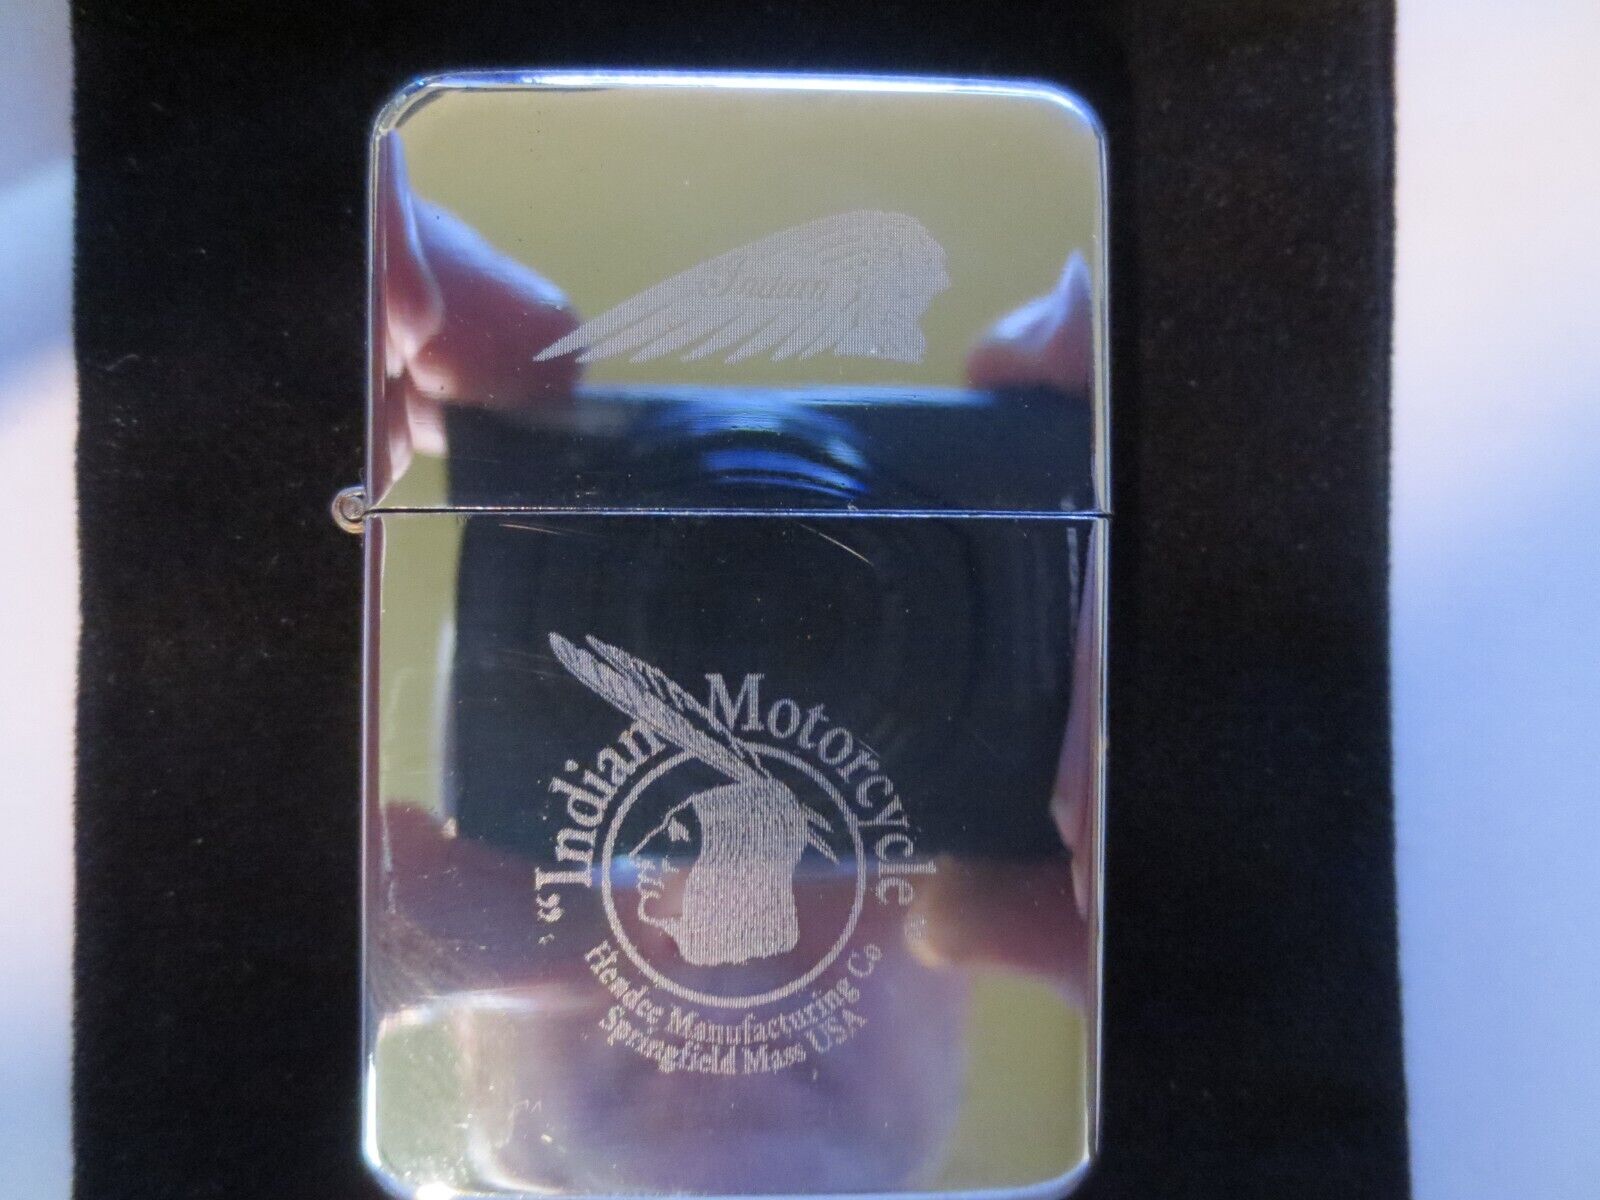 Indian Motorcycle Engraved Windproof Lighter.